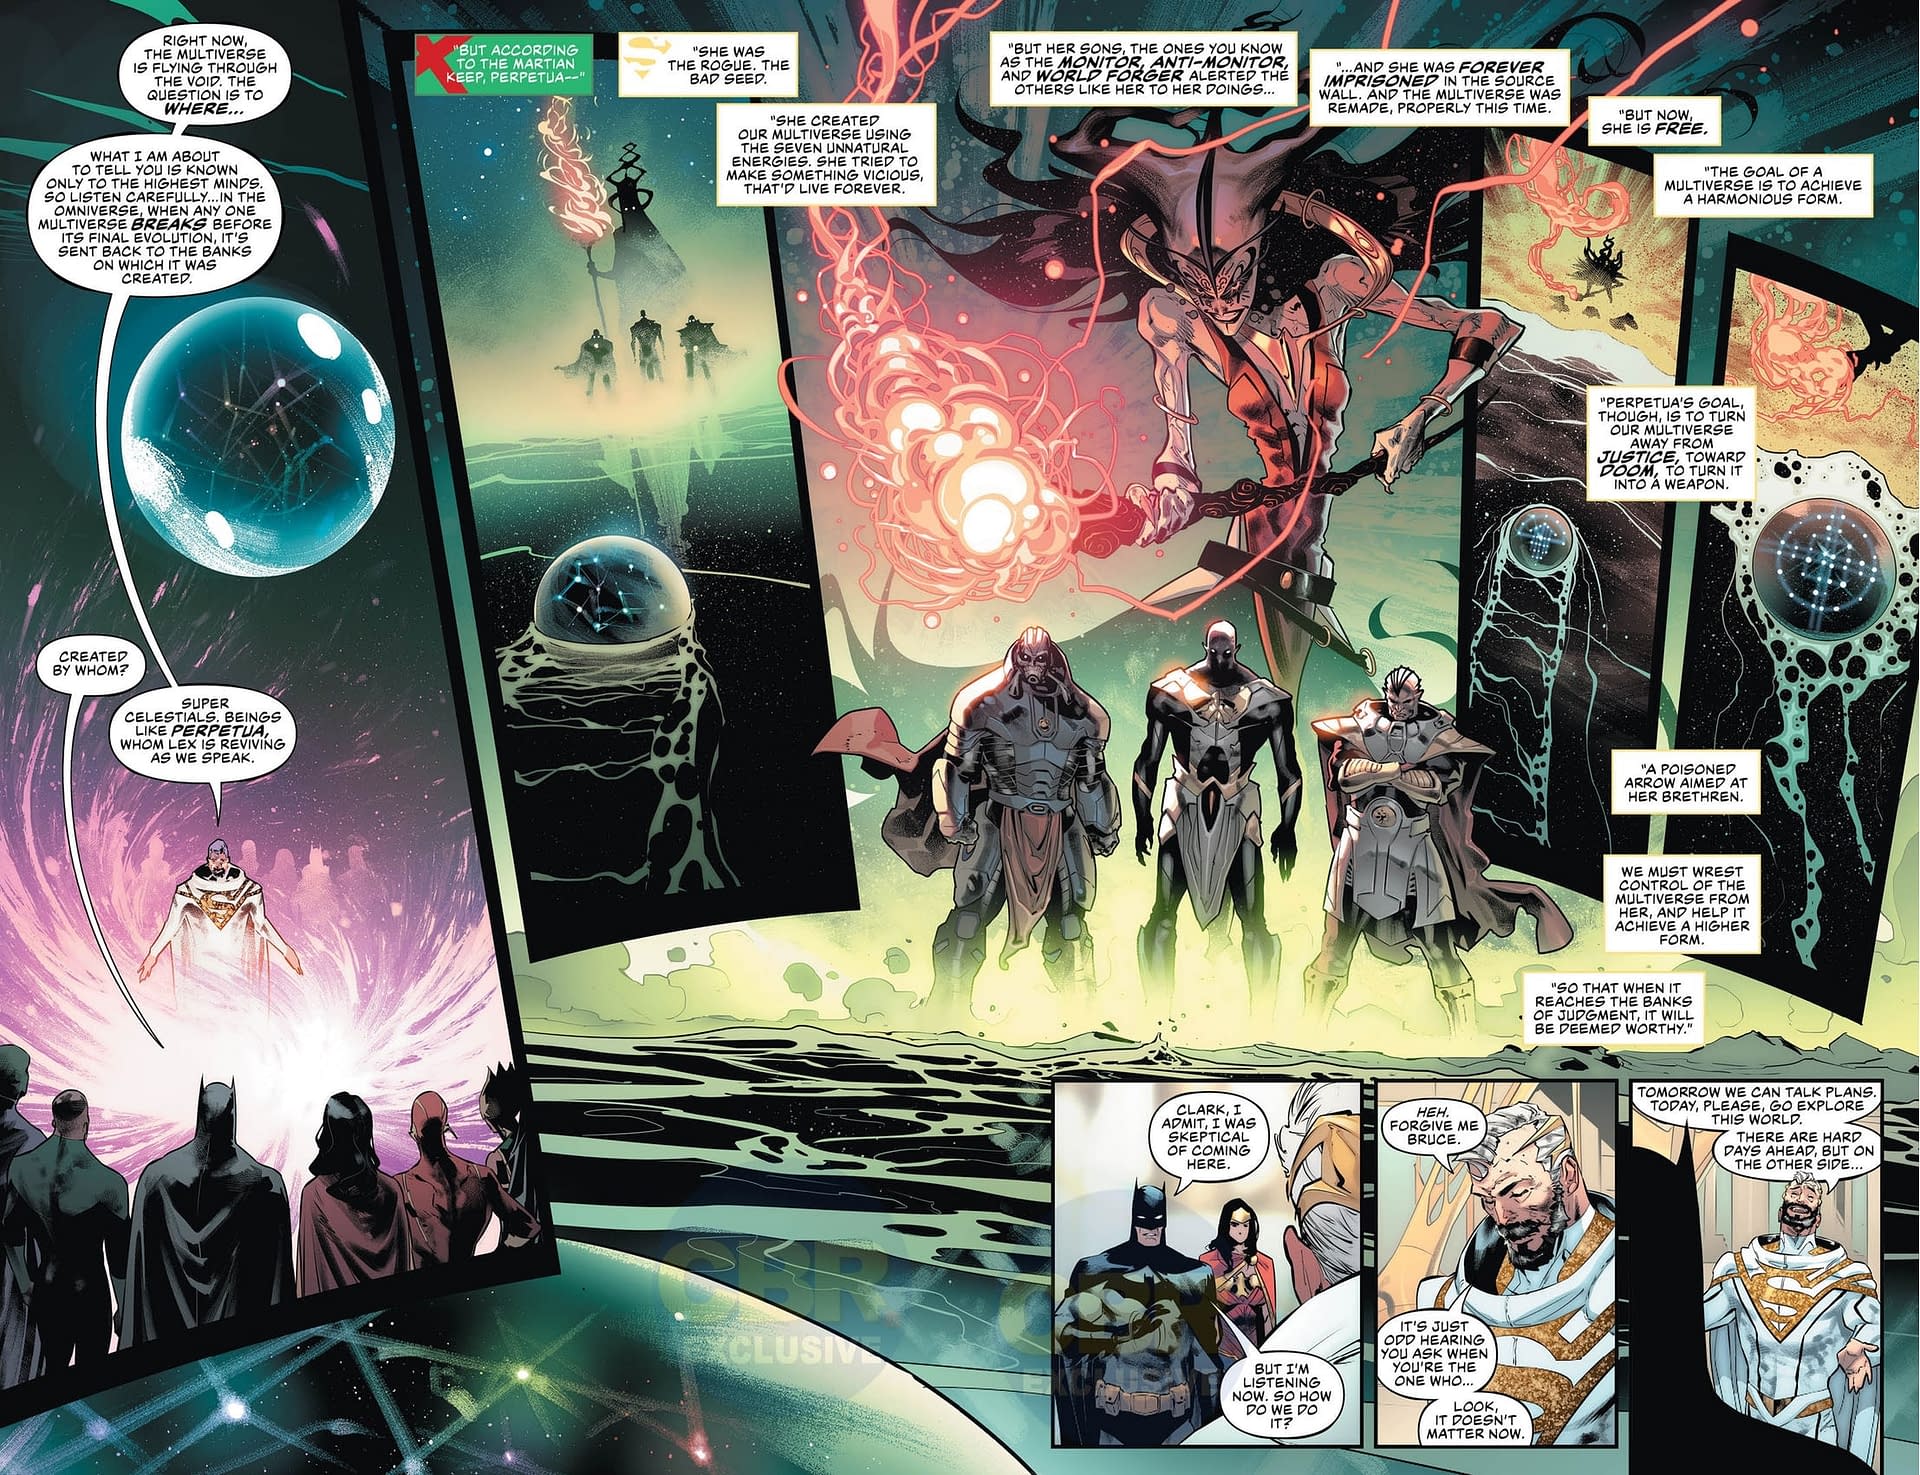 Tomorrow's Justice League #20 Rewrites the DC Universe One More Time, and Reveals Batman's Favourite Robin